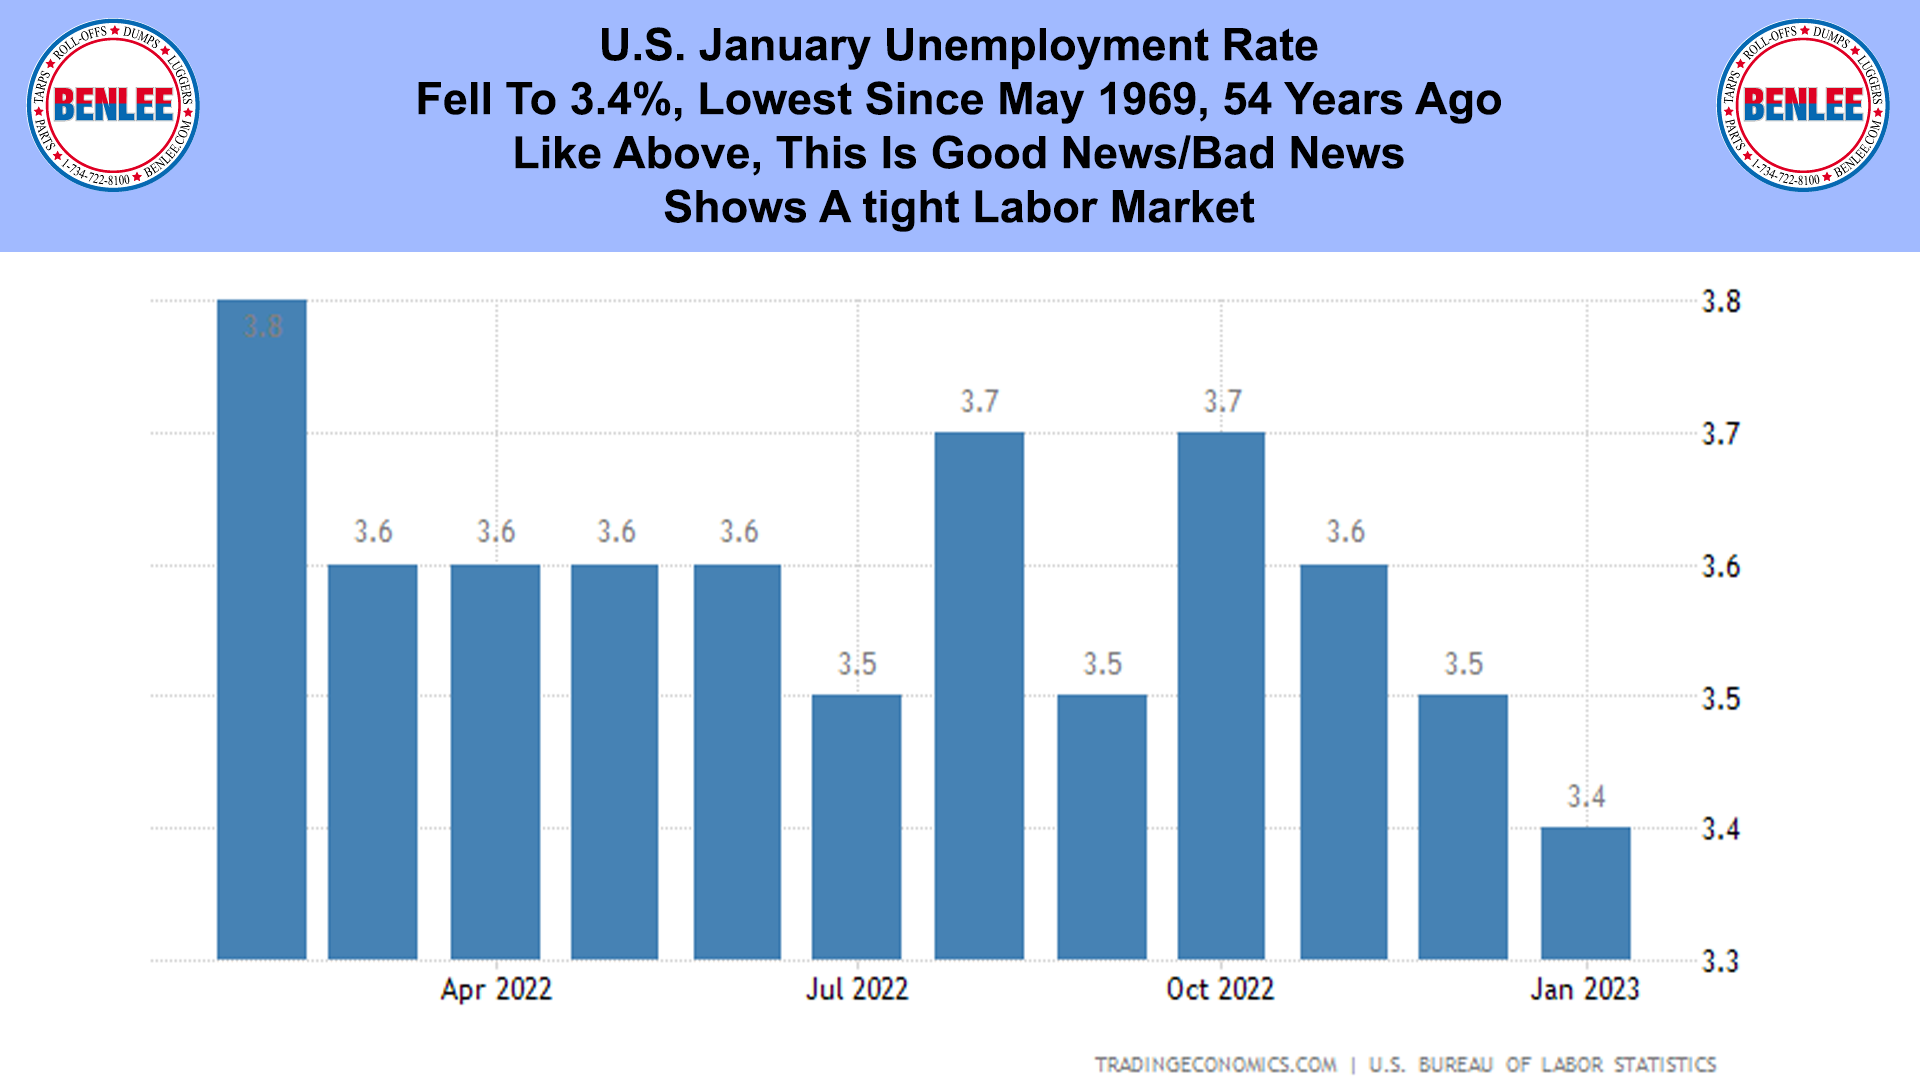 U.S. January Unemployment Rate